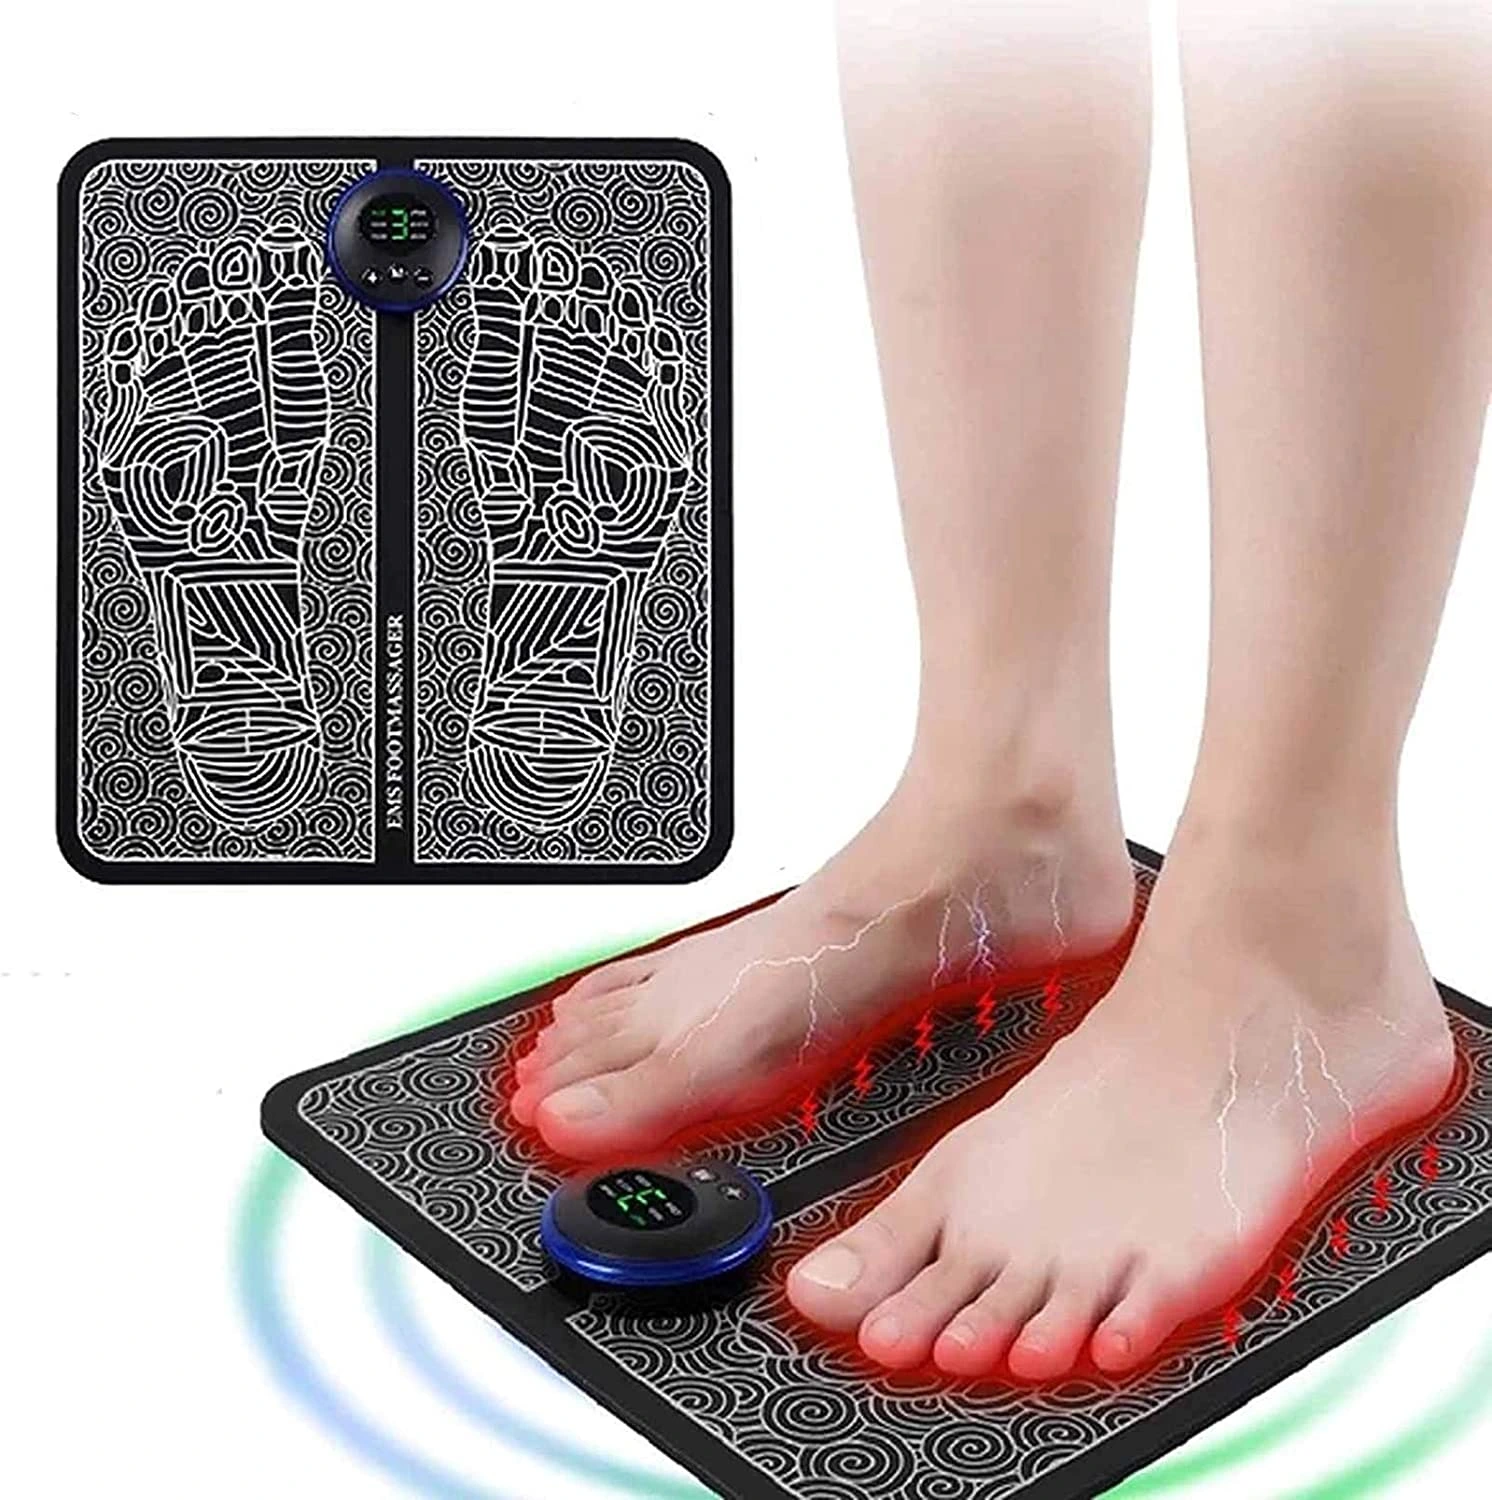 EMS Foot Massager Price in Pakistan